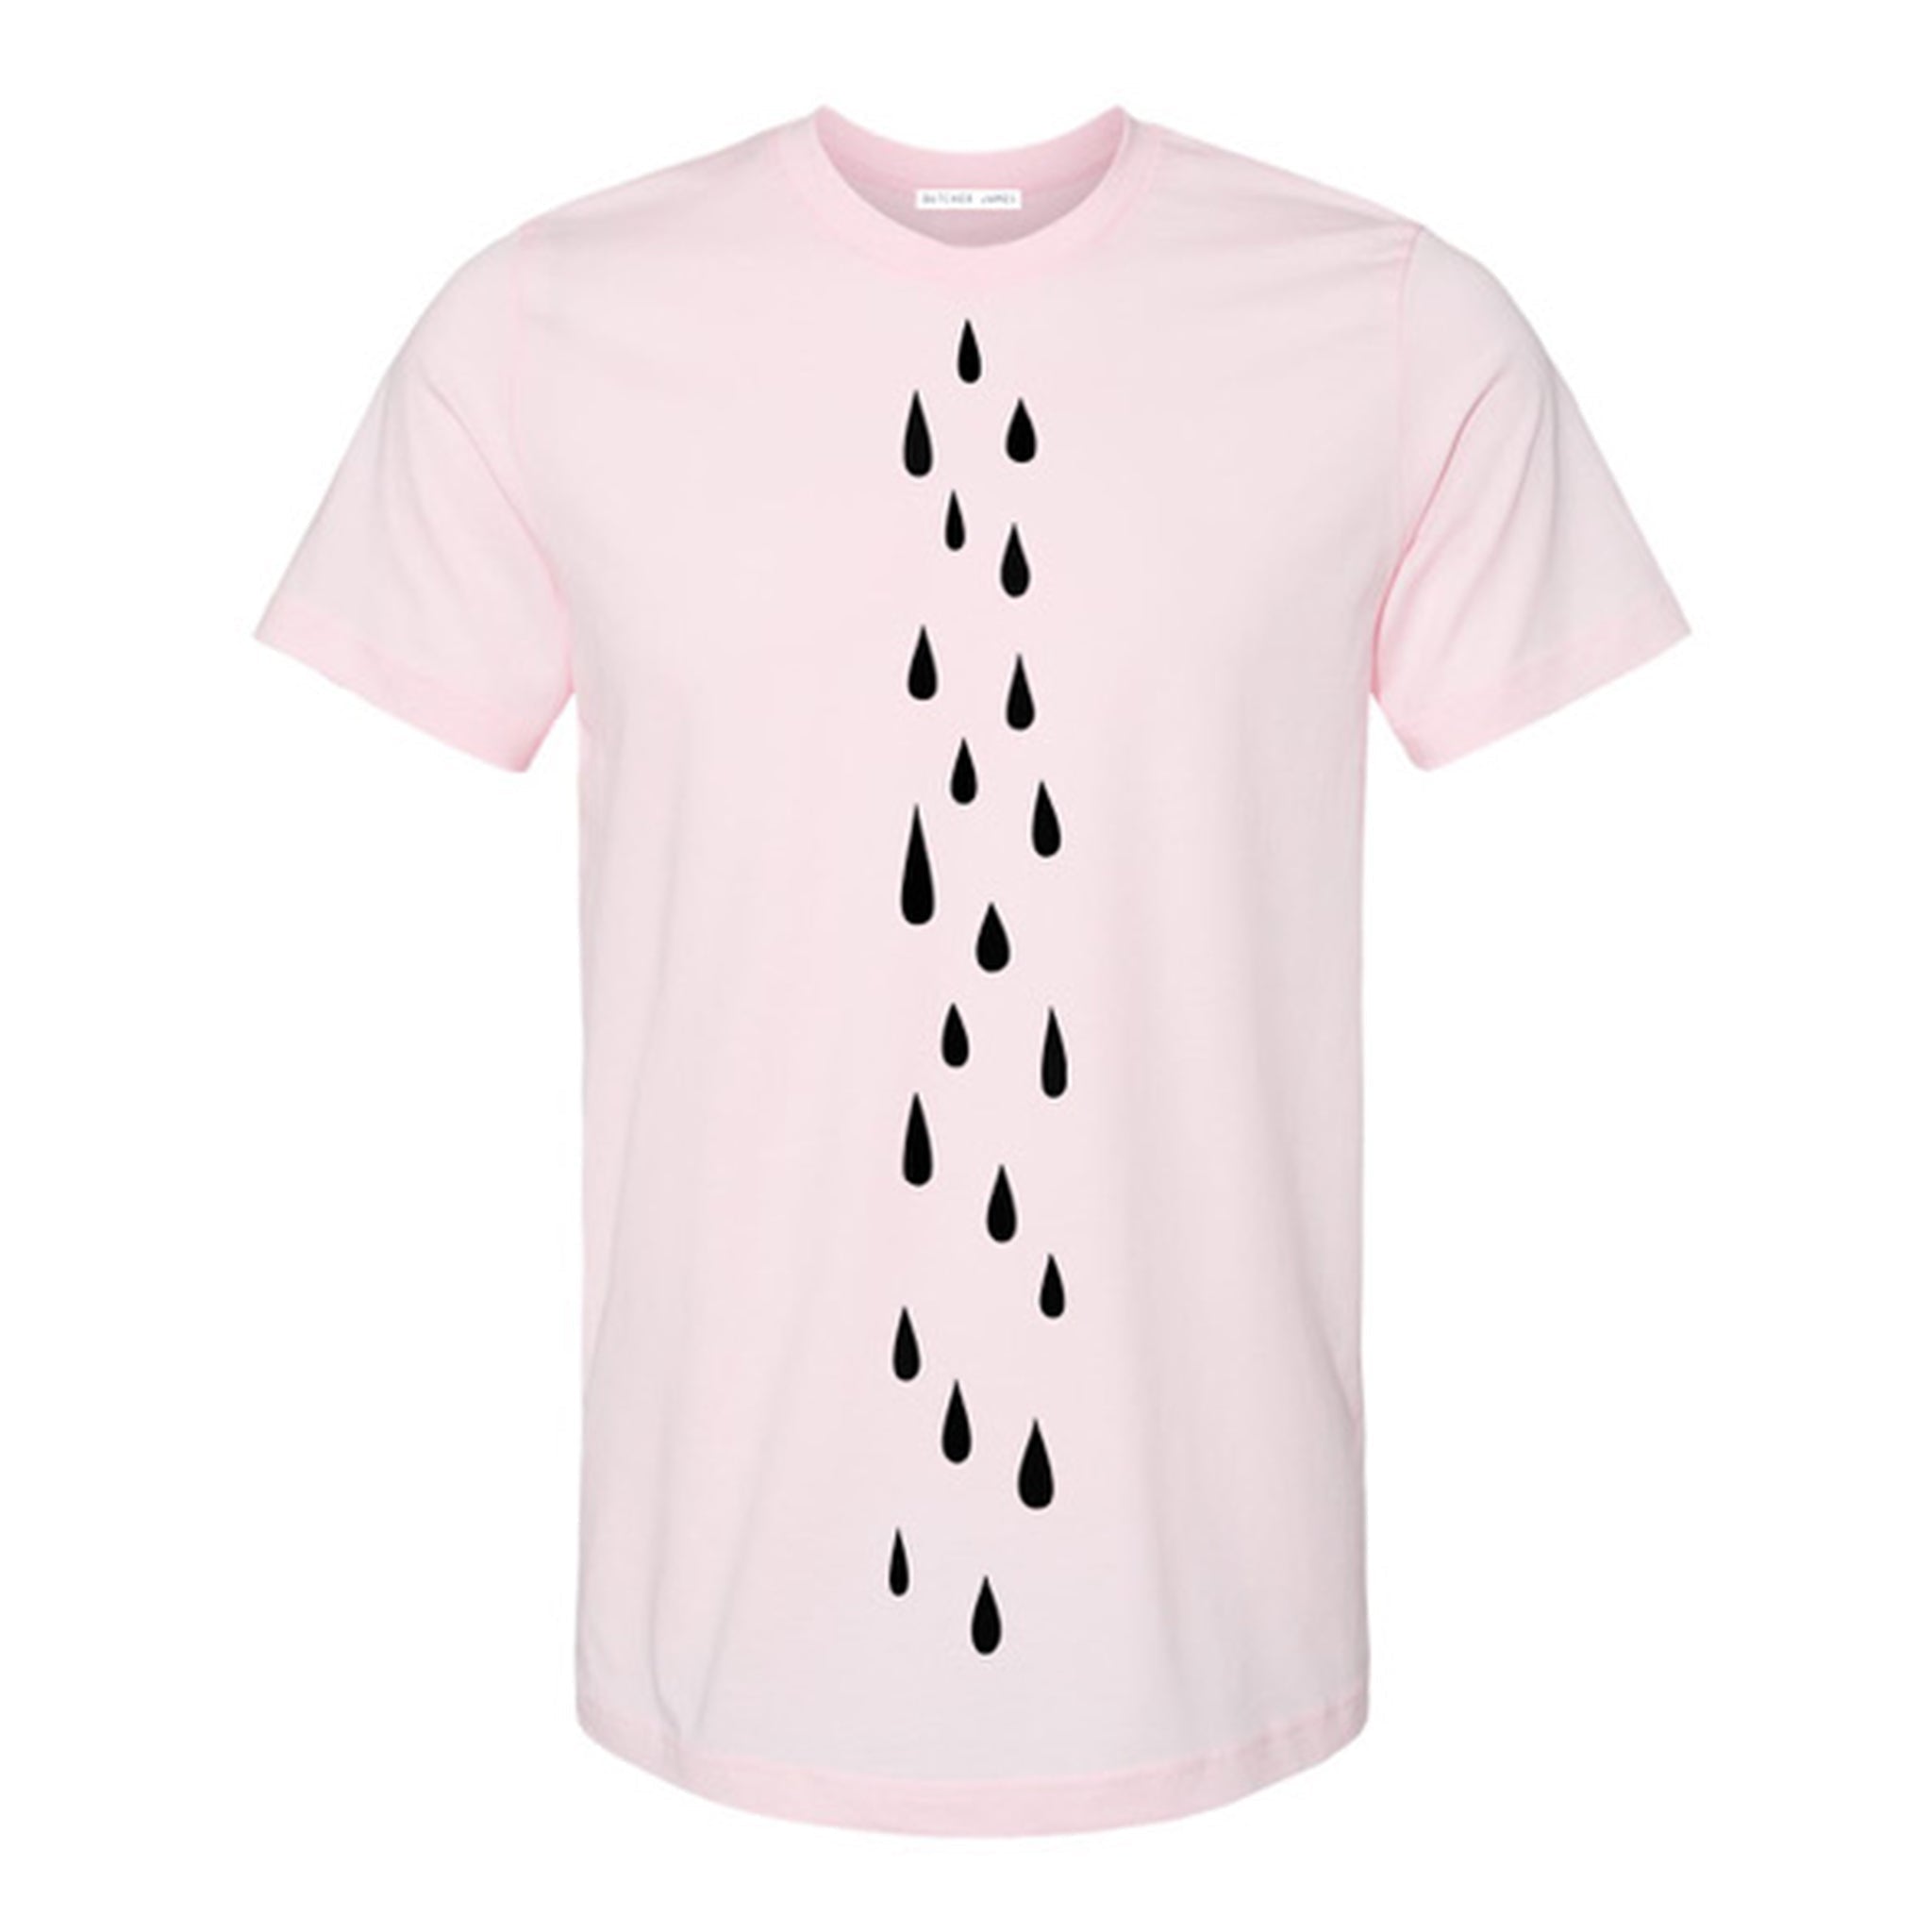 DRIPPY T-SHIRT - FADED PINK